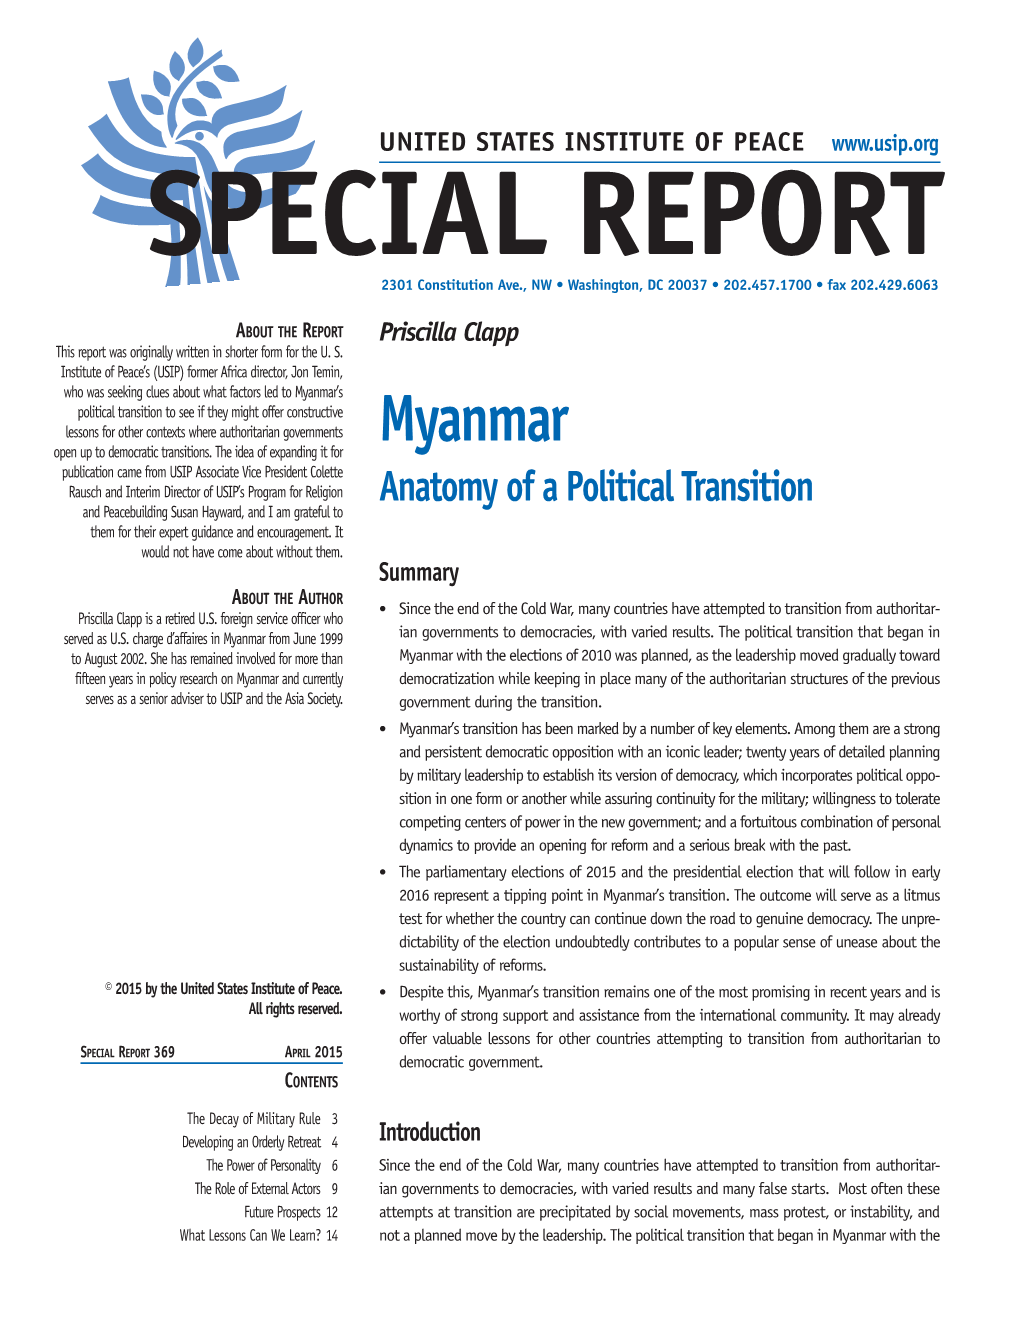 Myanmar: Anatomy of a Political Transition